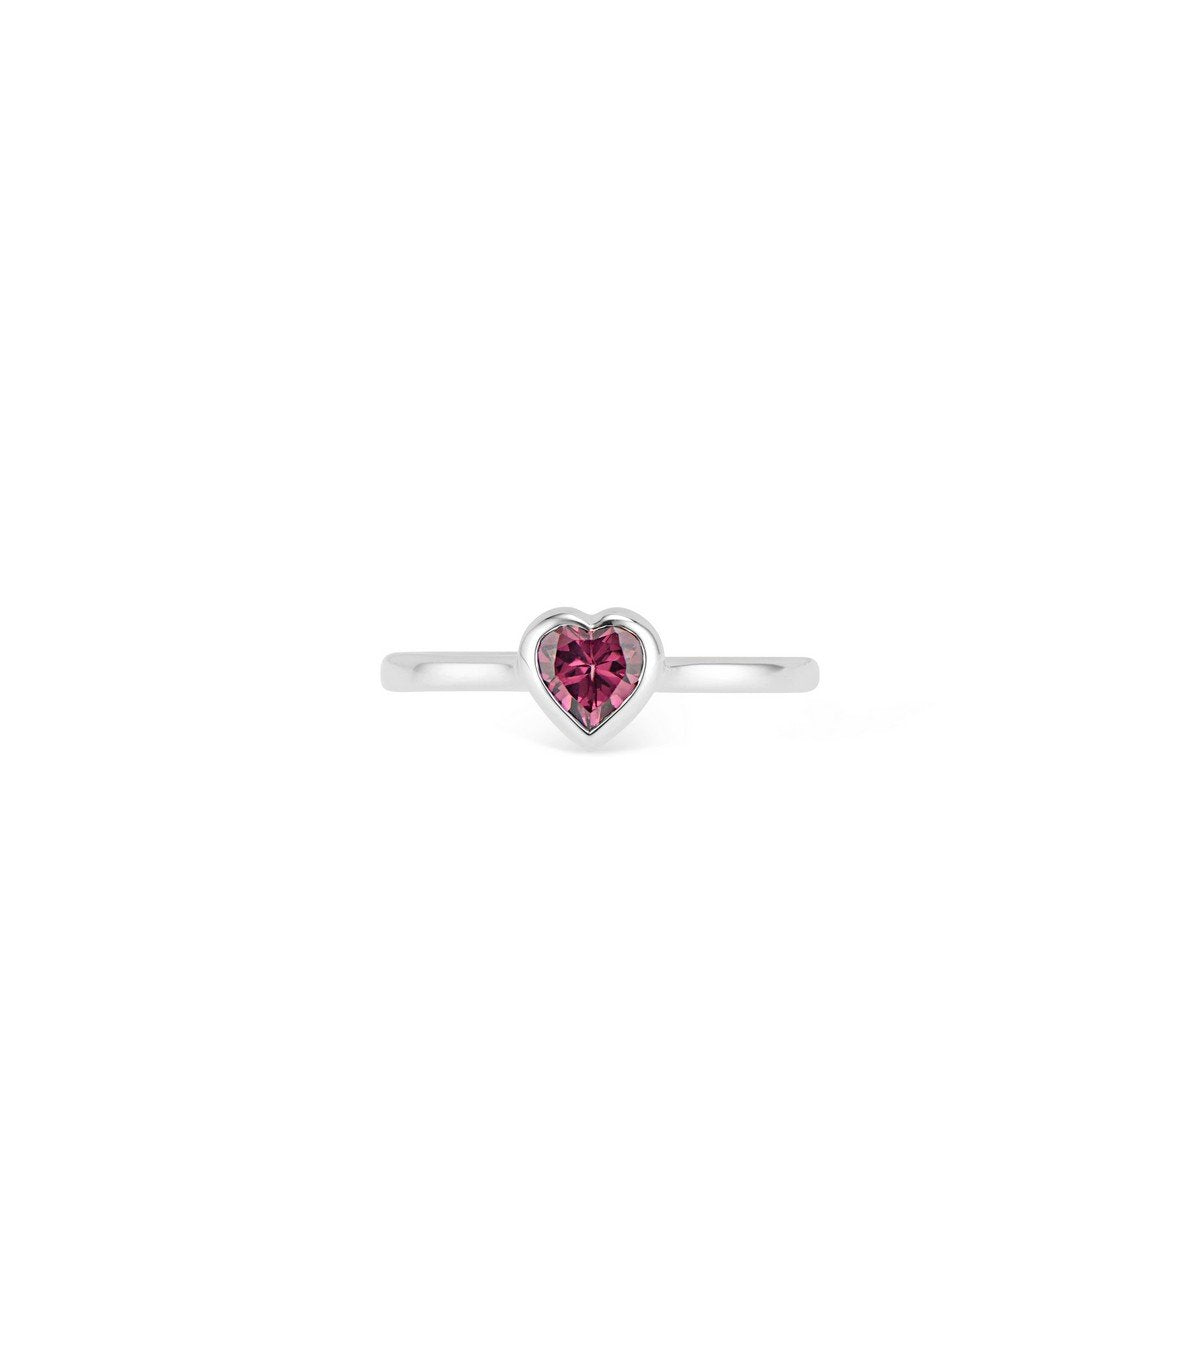 Gold Heart Ring with Rhodolite Garnet - Thomas Laine Jewelry